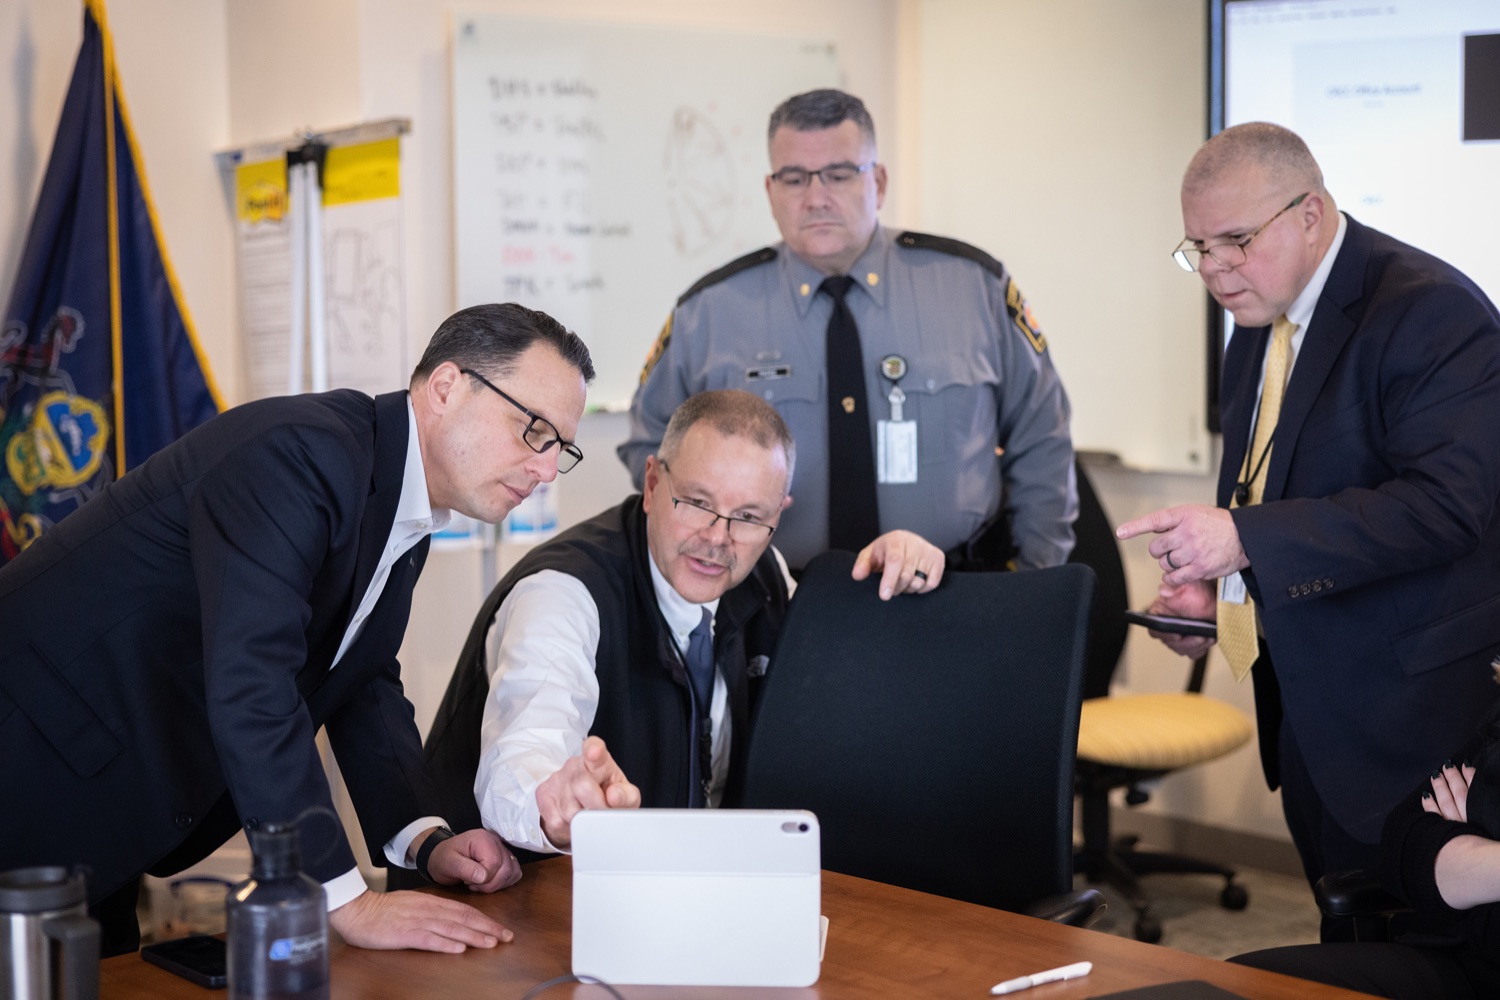 Governor Shapiro consulting with PEMA Director Randy Padfield and emergency management officials before giving urgent update on East Palestine train derailment from the PEMA media center.  FEBRUARY 06, 2023 - HARRISBURG, PA<br><a href="https://filesource.amperwave.net/commonwealthofpa/photo/22620_gov_trainDerailment_dz_004.JPG" target="_blank">⇣ Download Photo</a>